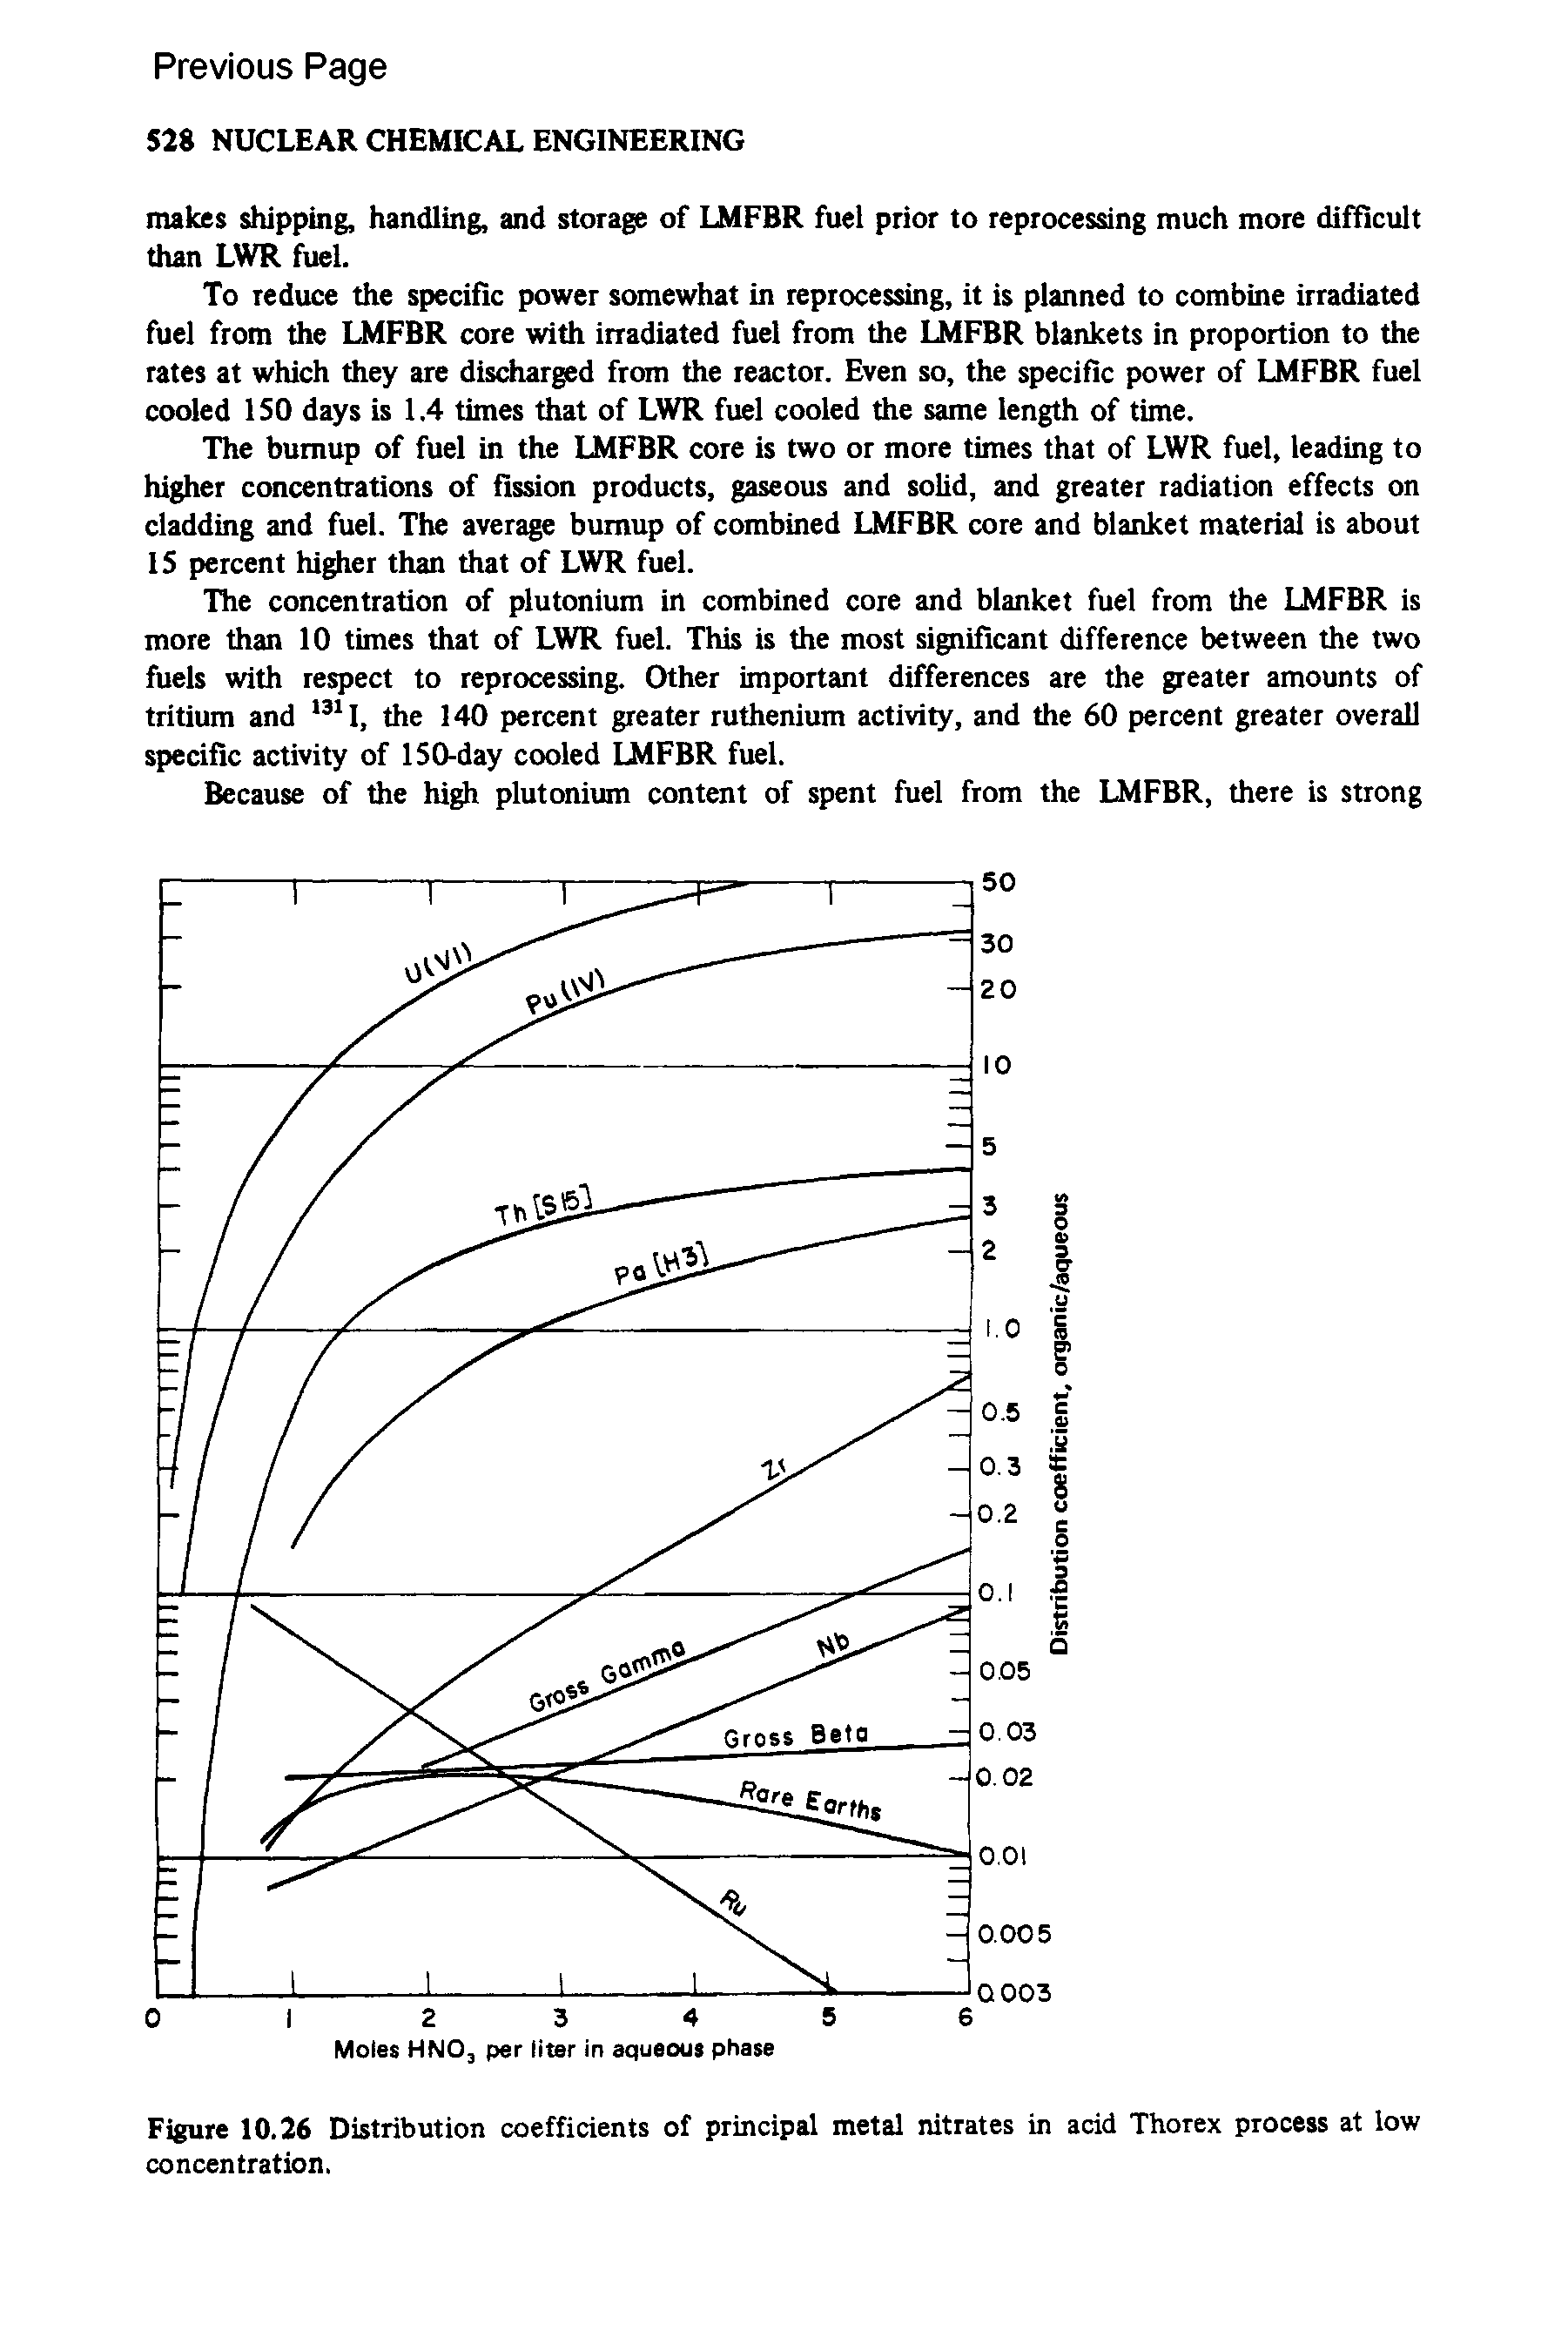 Figure 10.26 Distribution coefficients of principal metal nitrates in acid Thorex process at low concentration.